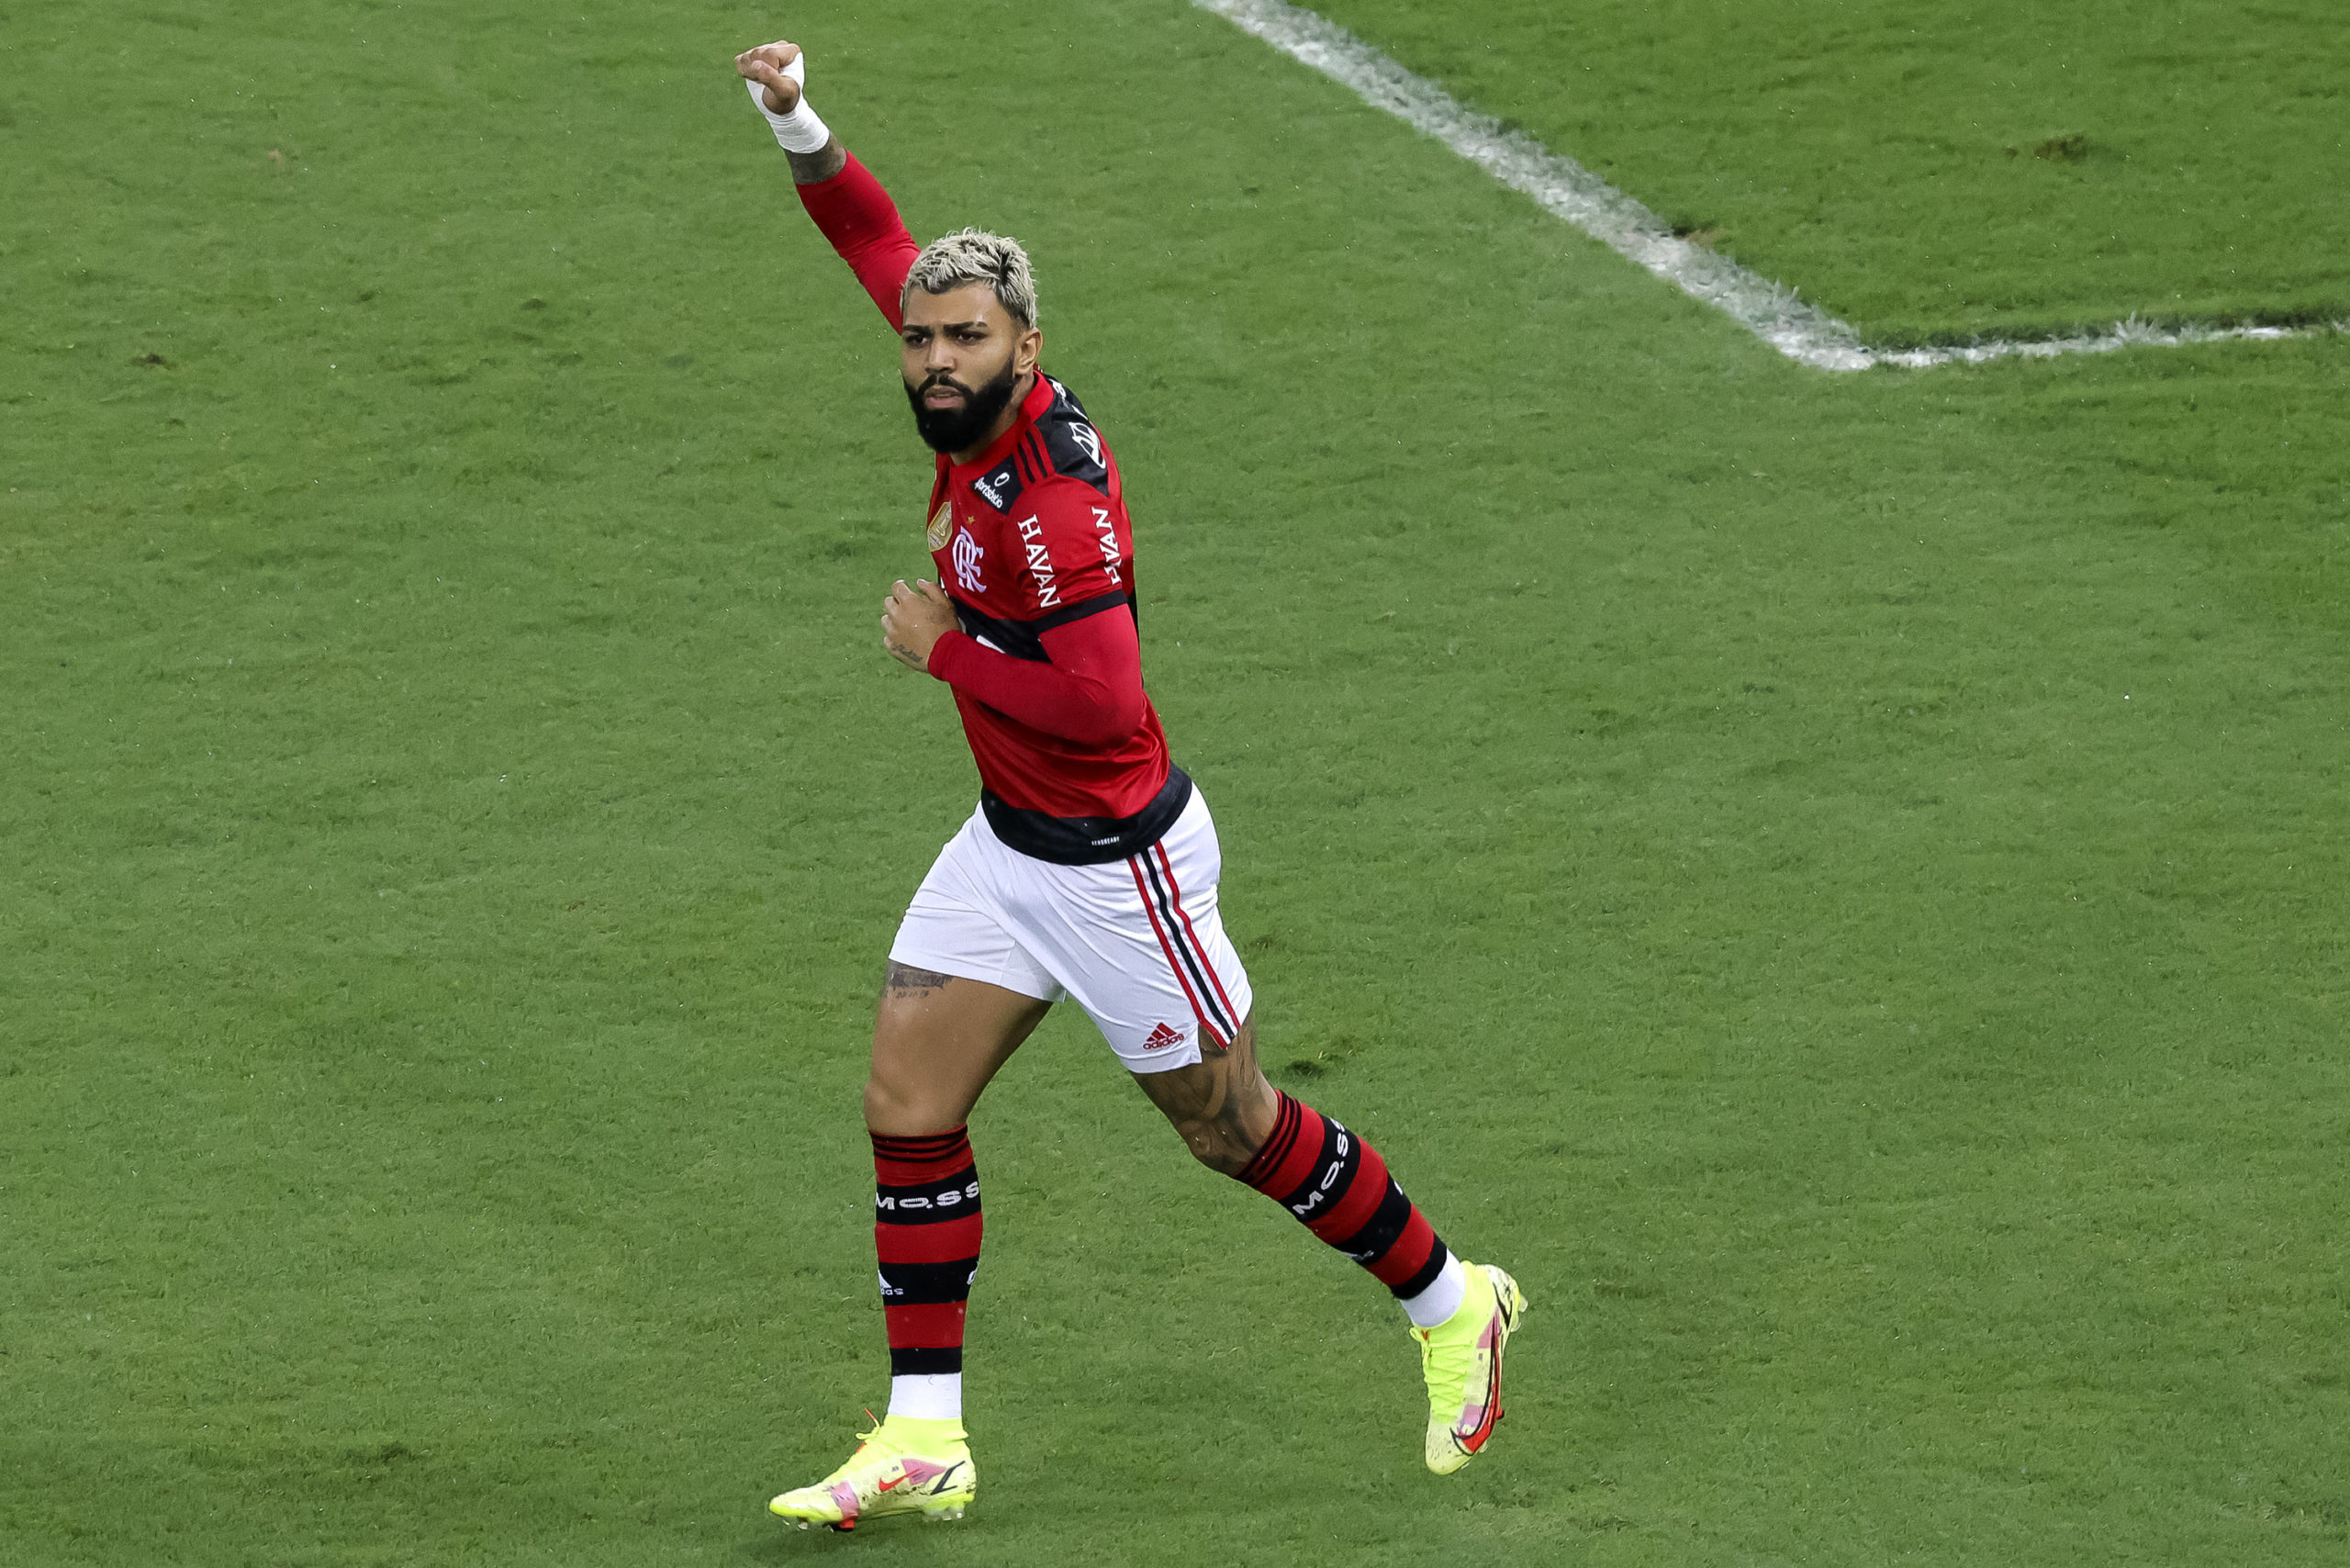 West Ham should have a very good chance of signing Gabriel Barbosa from Flamengo in the January window